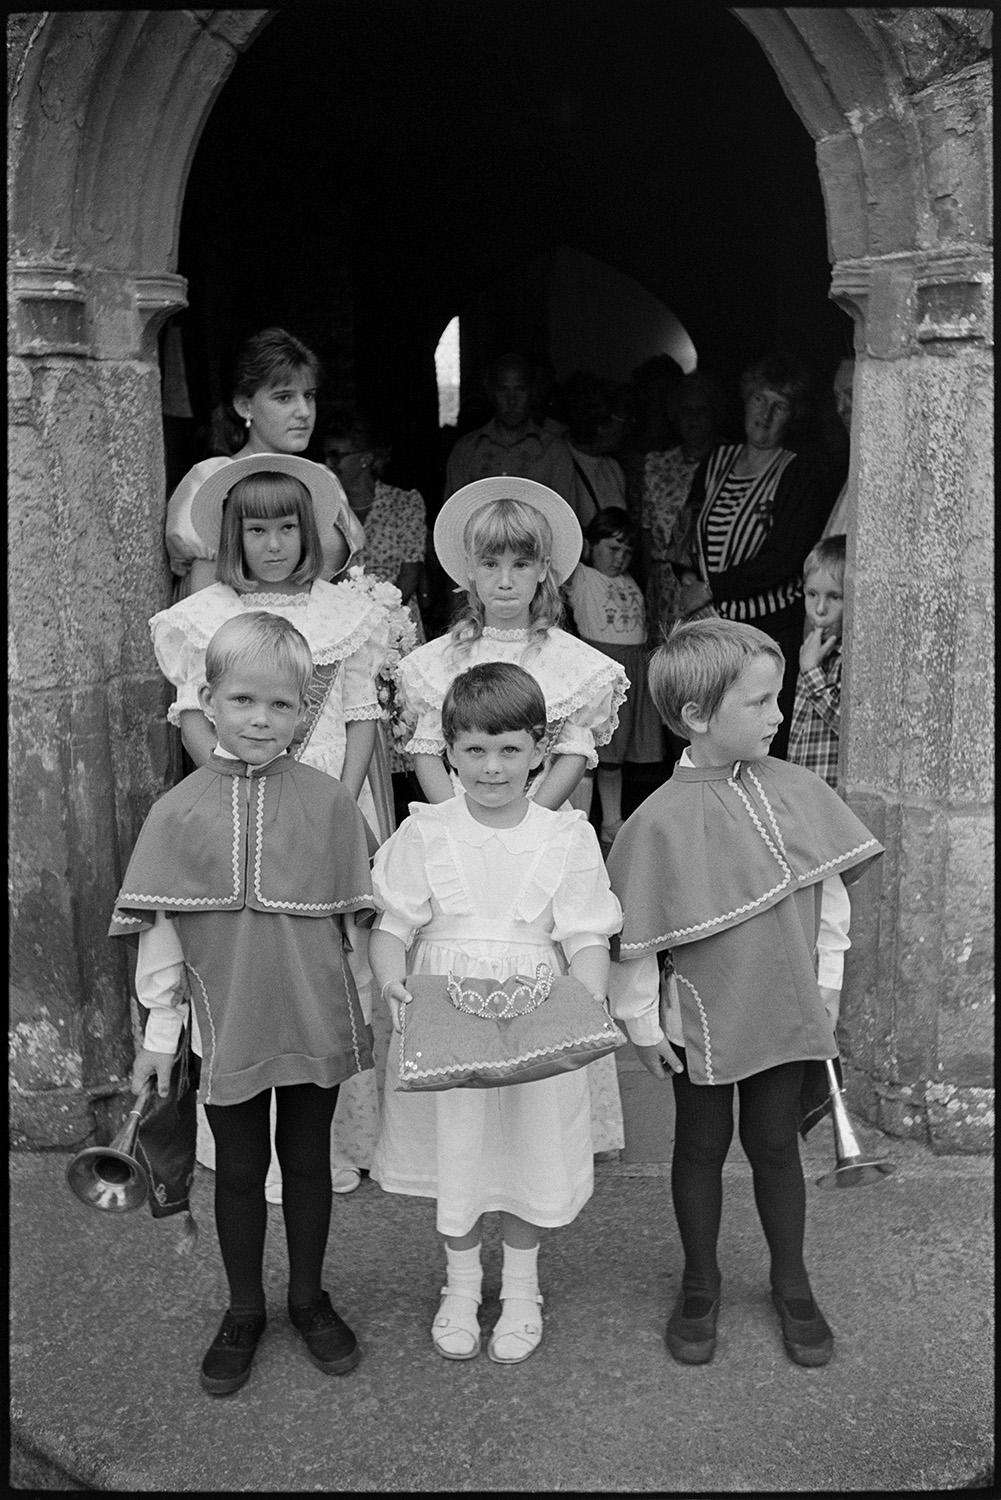 Chulmleigh Fair, Queen and attendants leaving church and processing through village.
[Boys and girls dressed for their role as attendants to the Chulmleigh Fair Queen standing in front of the entrance to the Church of St Mary Magdalene, Chulmleigh. The two boys are carrying trumpets and one of the girls is carrying a crown resting on a cushion. The Fair Queen and other women are gathered in the background.]